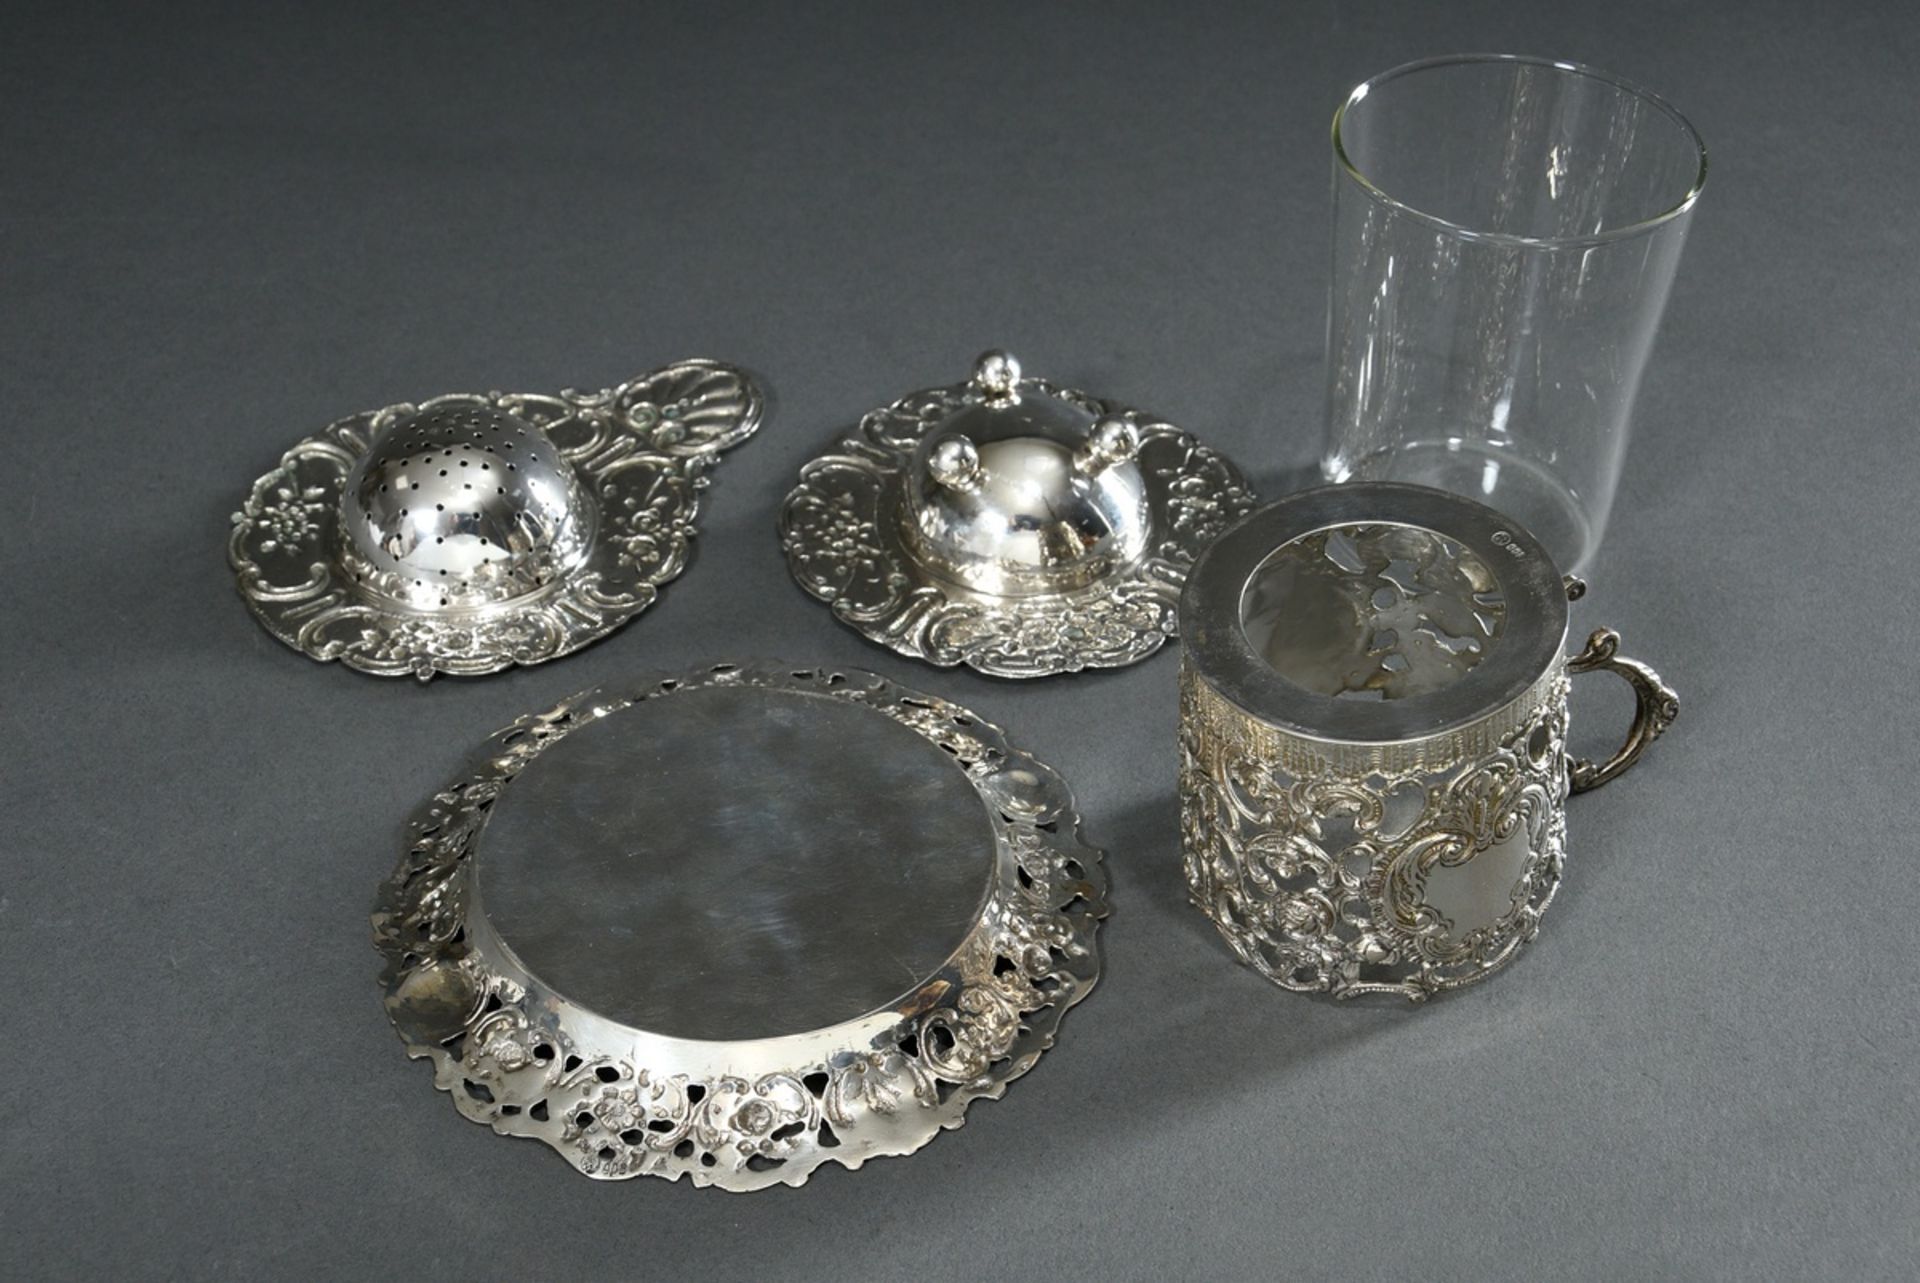 2 pieces richly reliefed tea glass on saucer and tea strainer on saucer "Roses and Rocailles", Germ - Image 5 of 7